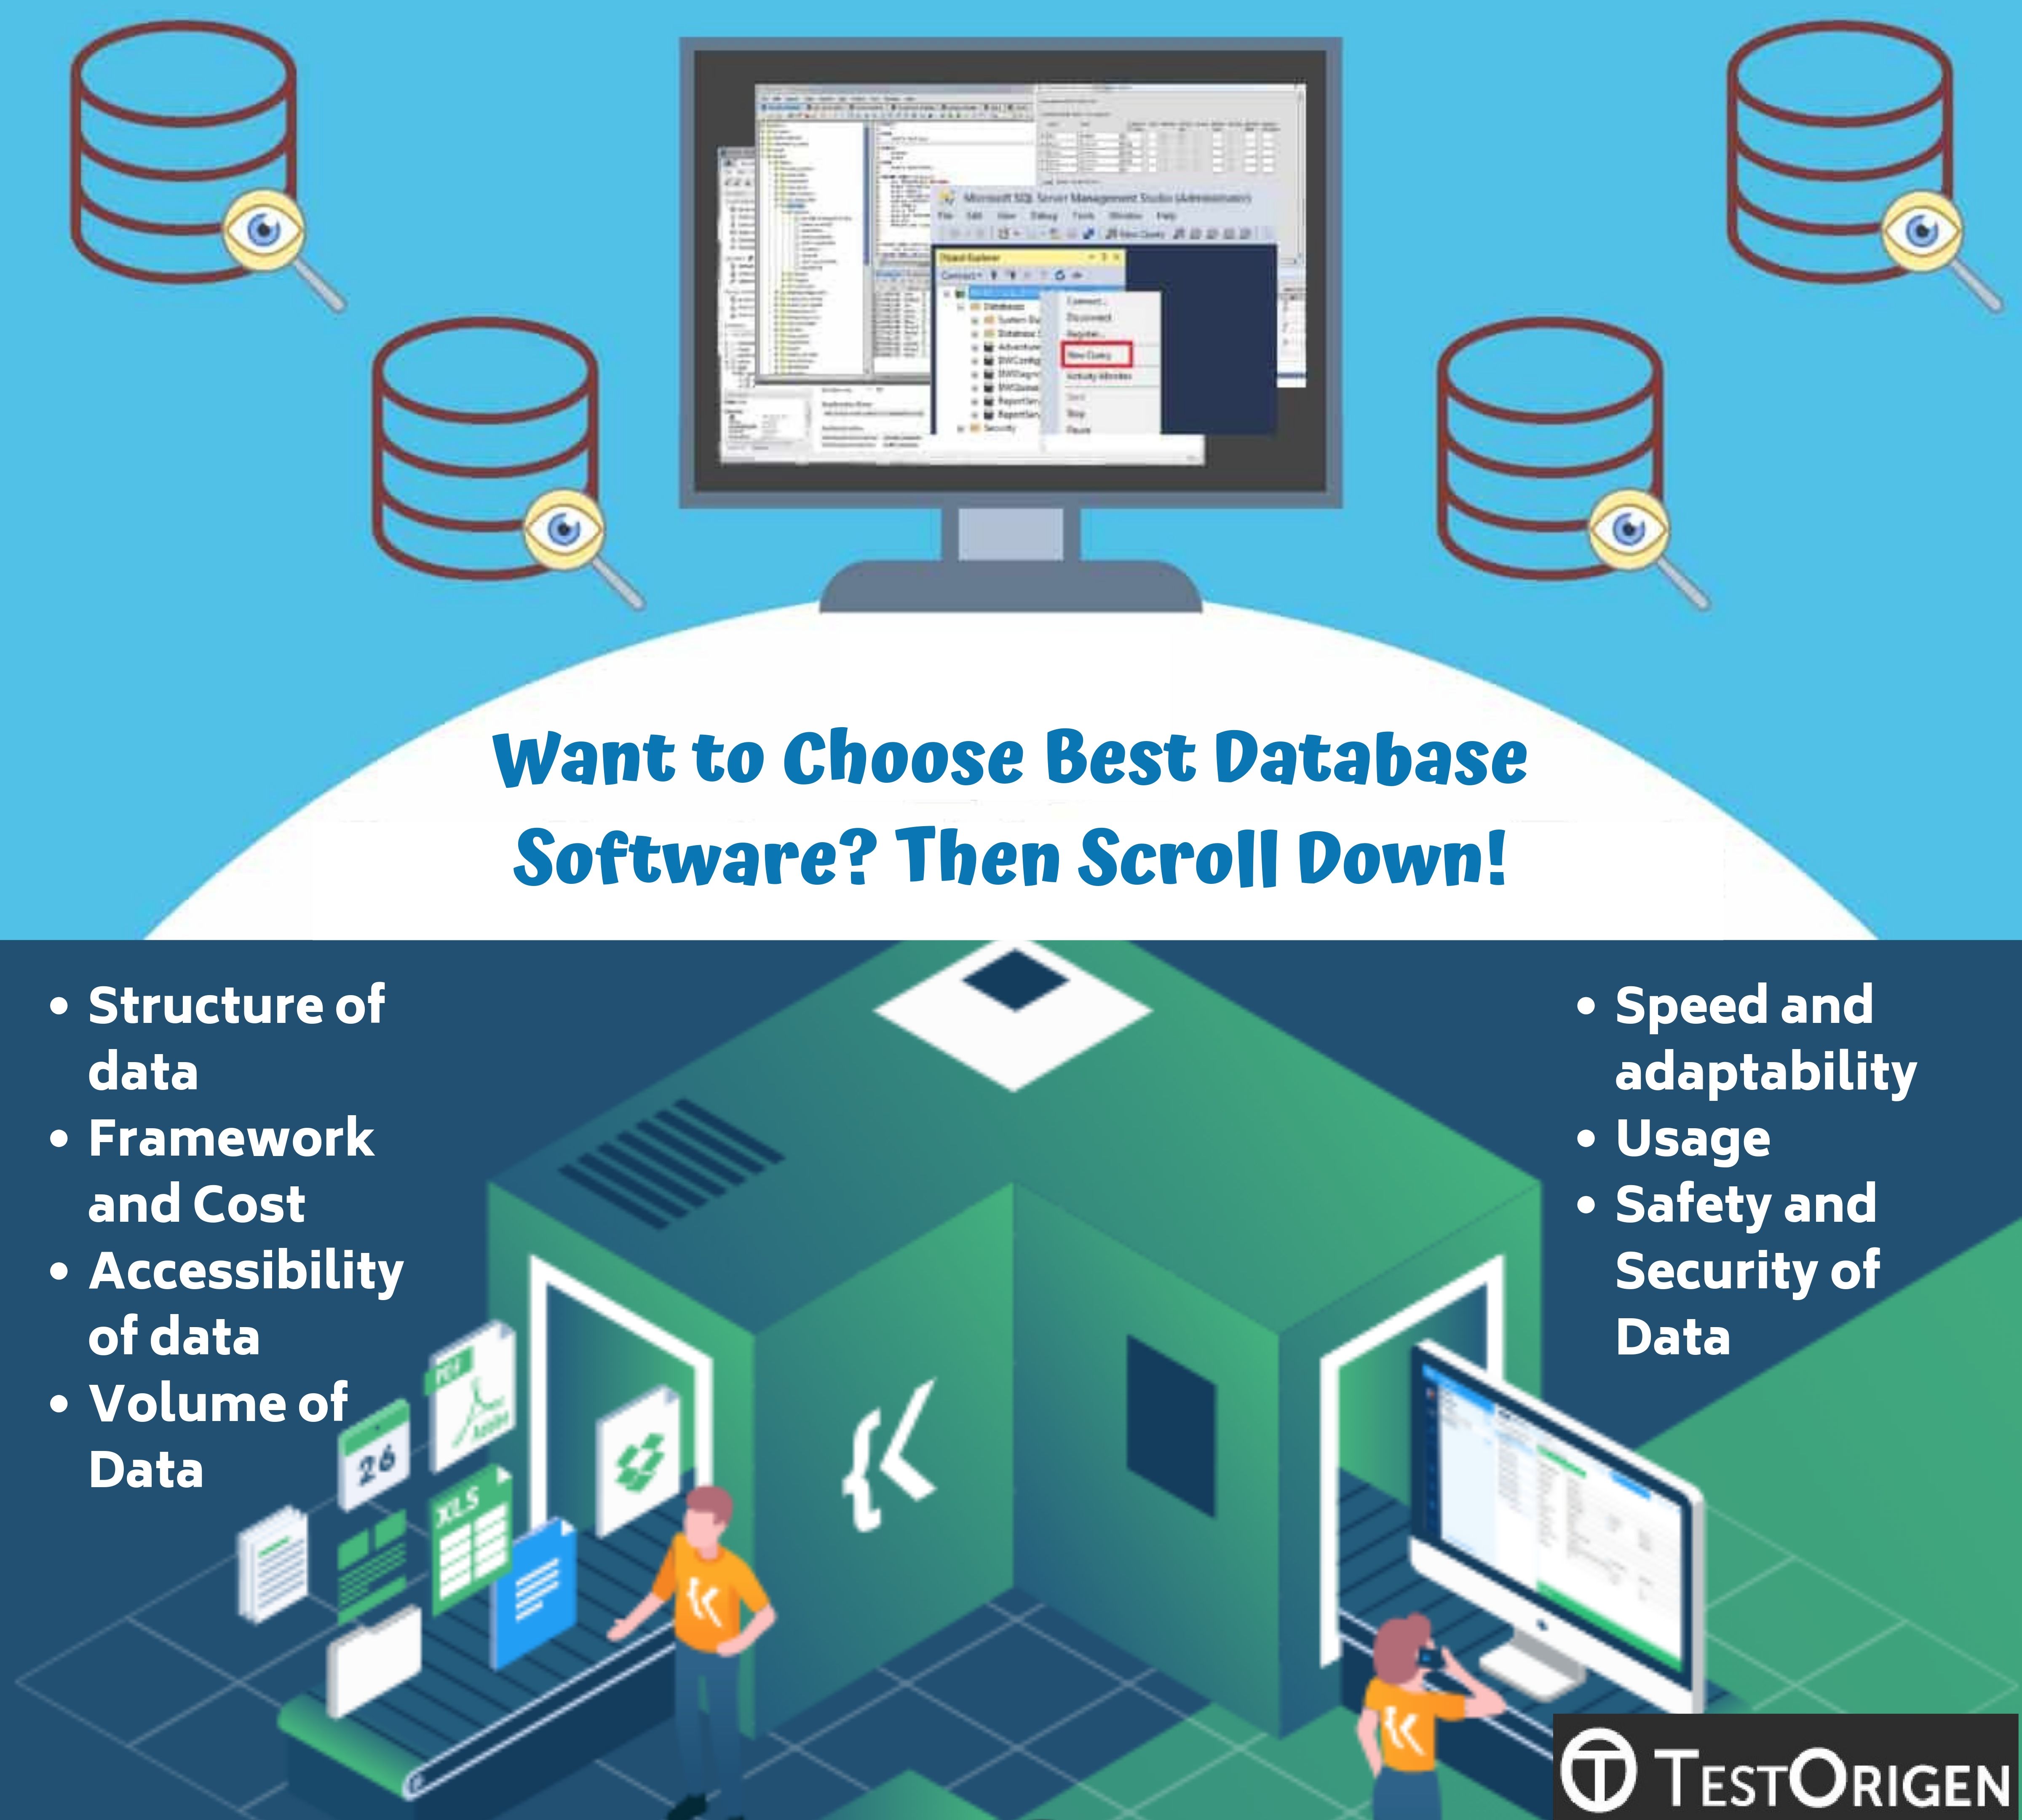 Want to Choose Best Database Software? Then Scroll Down!